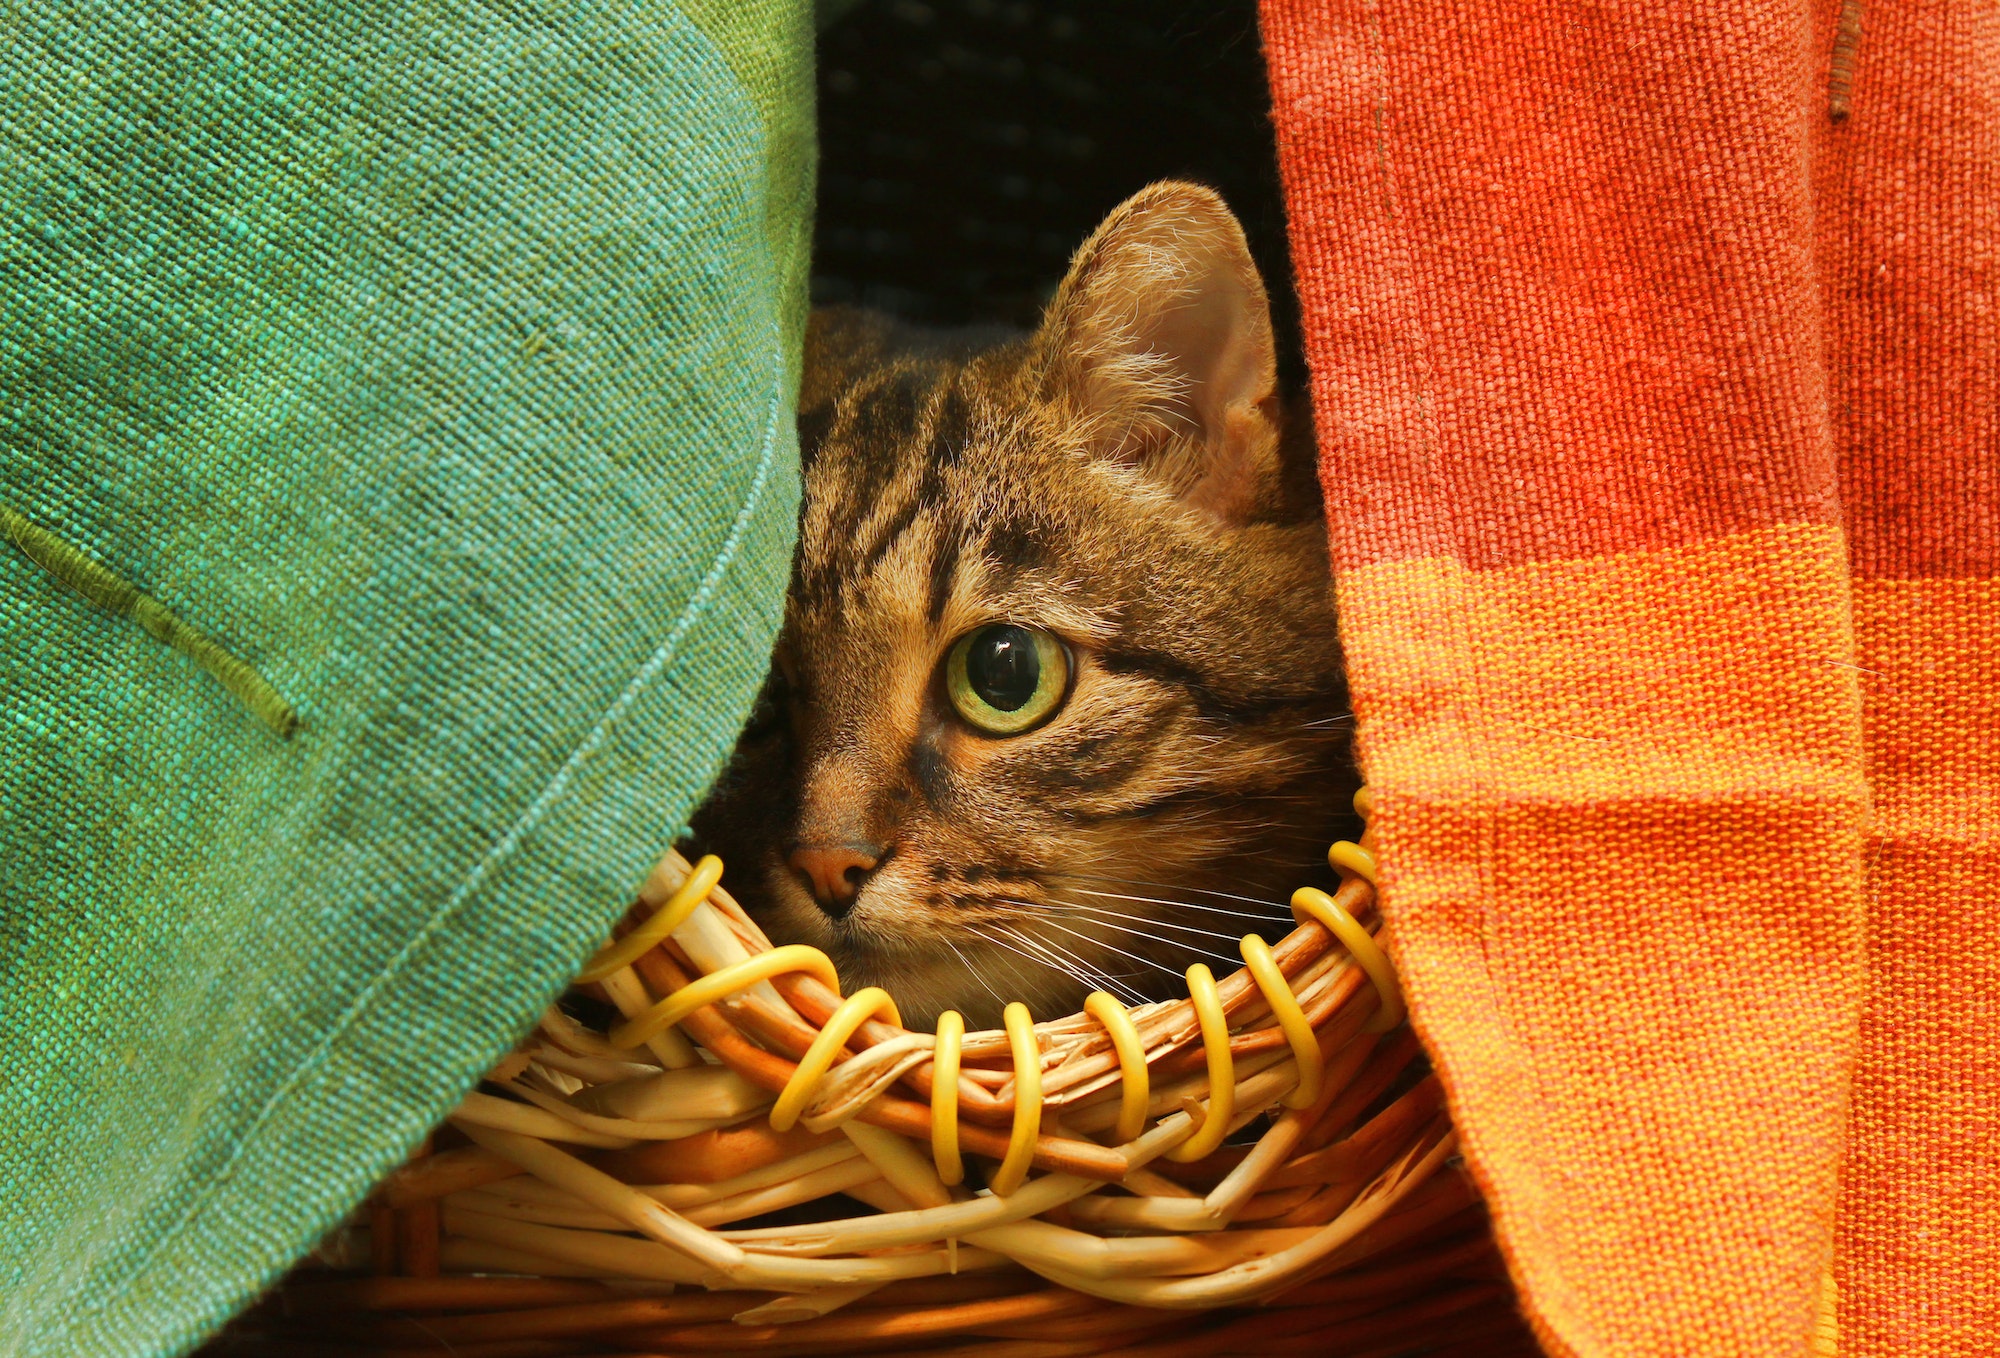 Cute cat watching from her hiding place